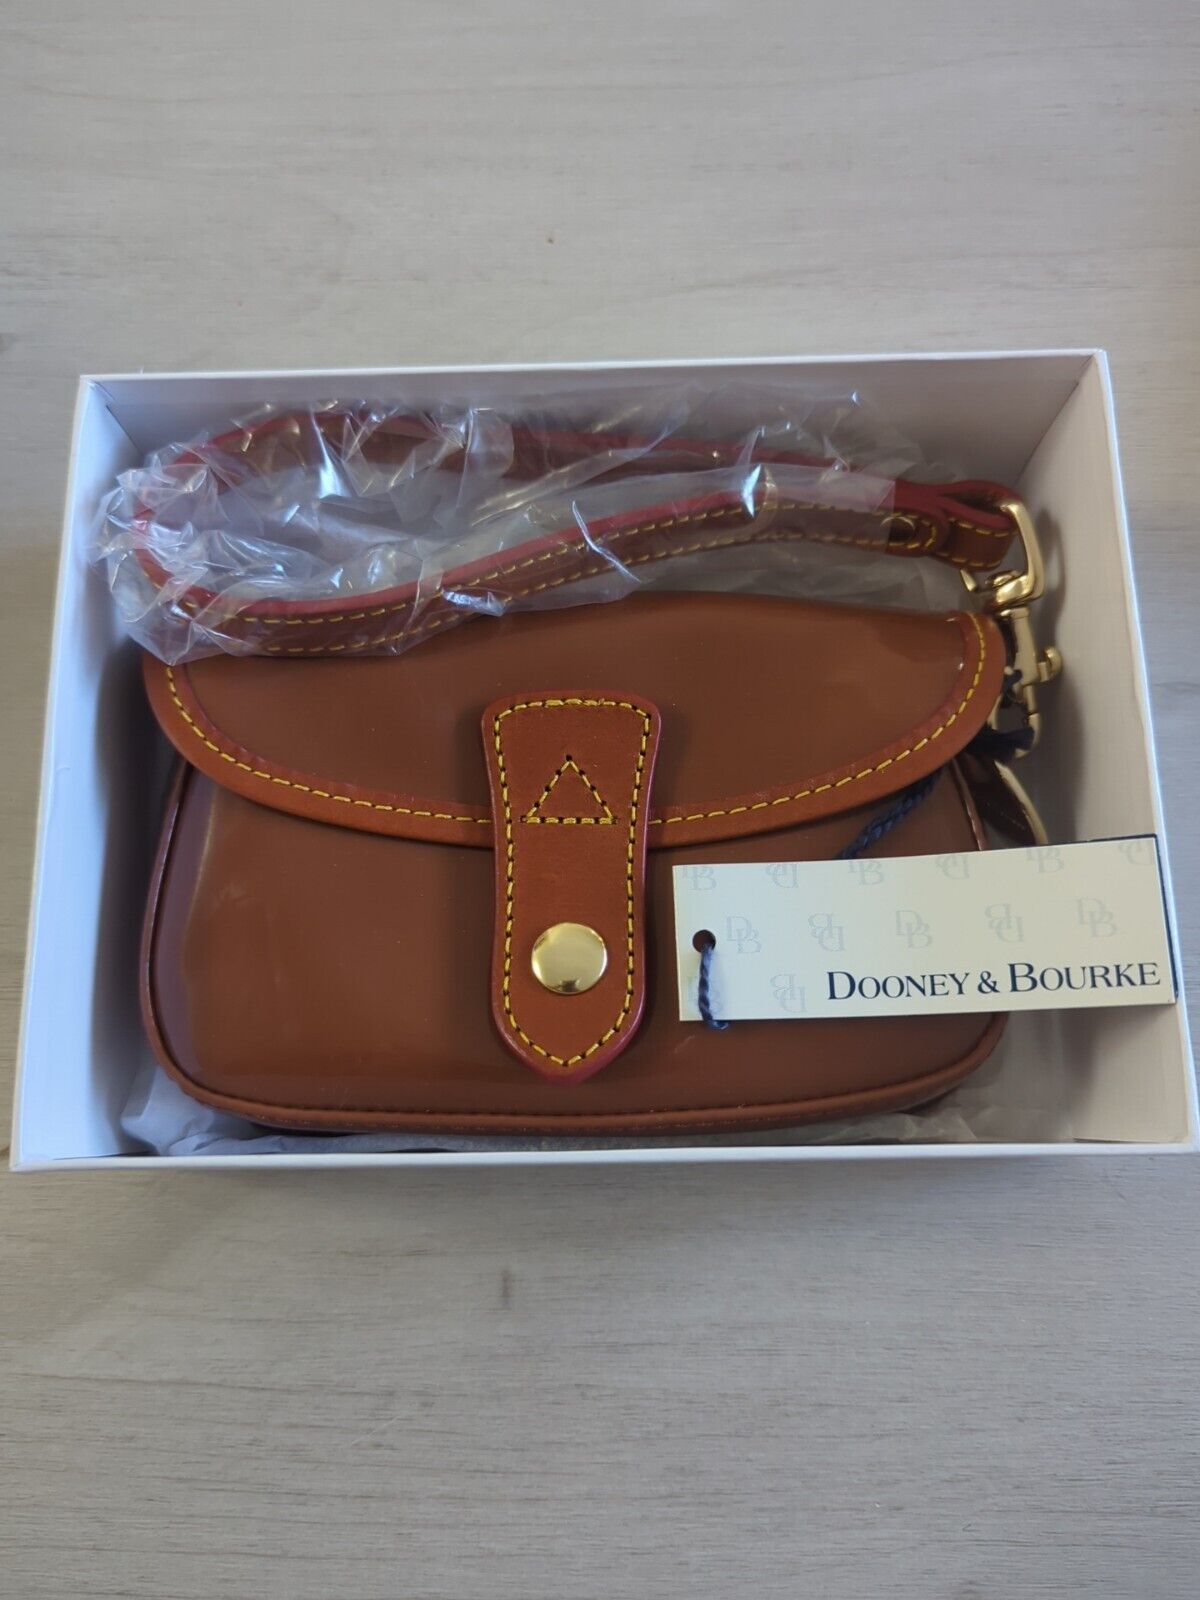 Dooney And Bourke Small Wristlet Tan With Leather Trim New W/ Tags